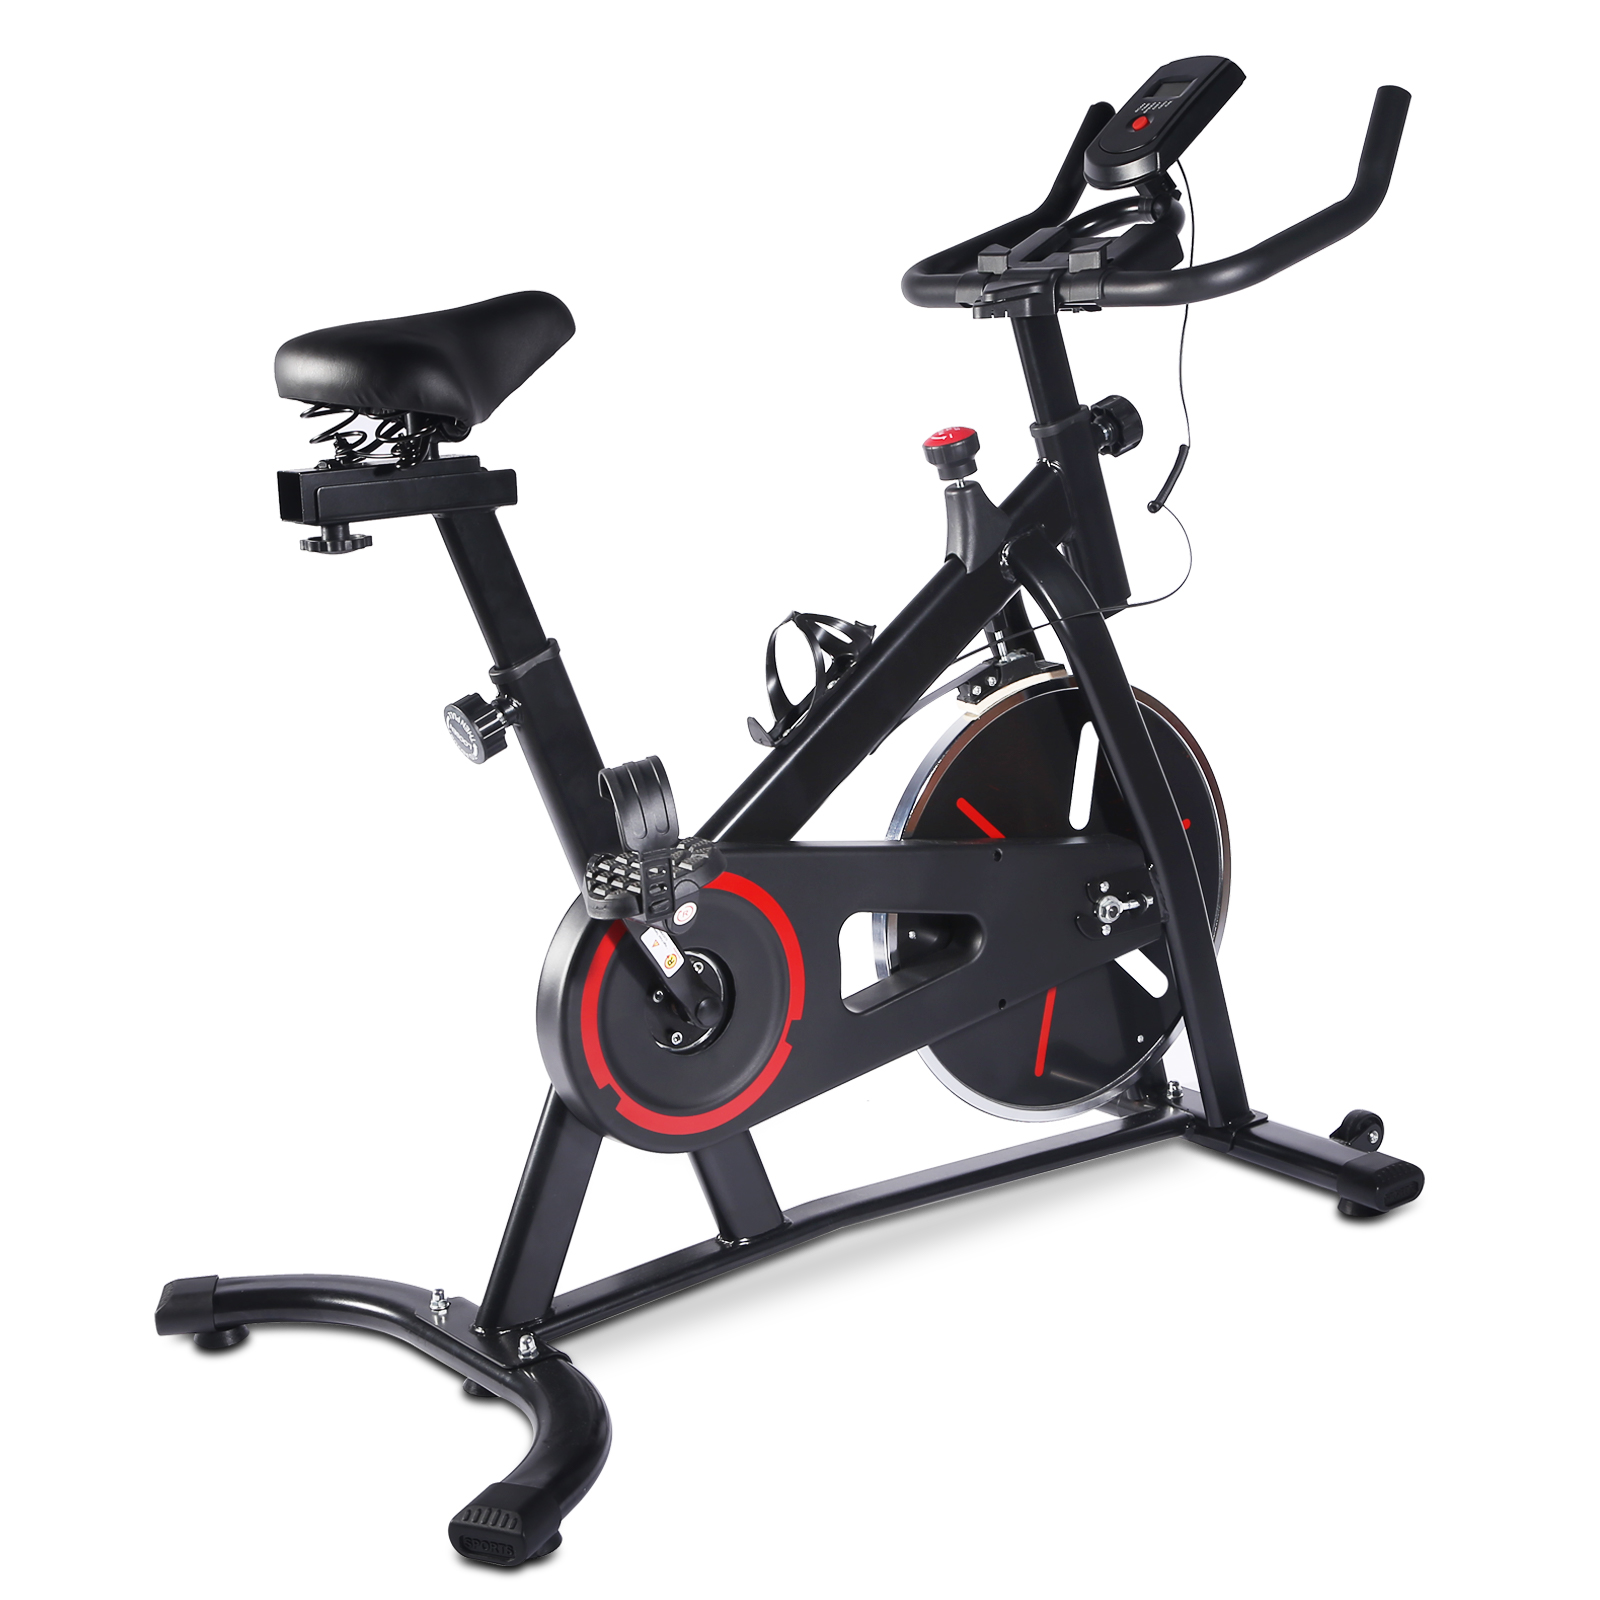 YSSOA Exercise Bike Indoor Cycling Training Stationary Exercise Equipment for Home Cardio Workout Cycle Bike Training-CASAINC